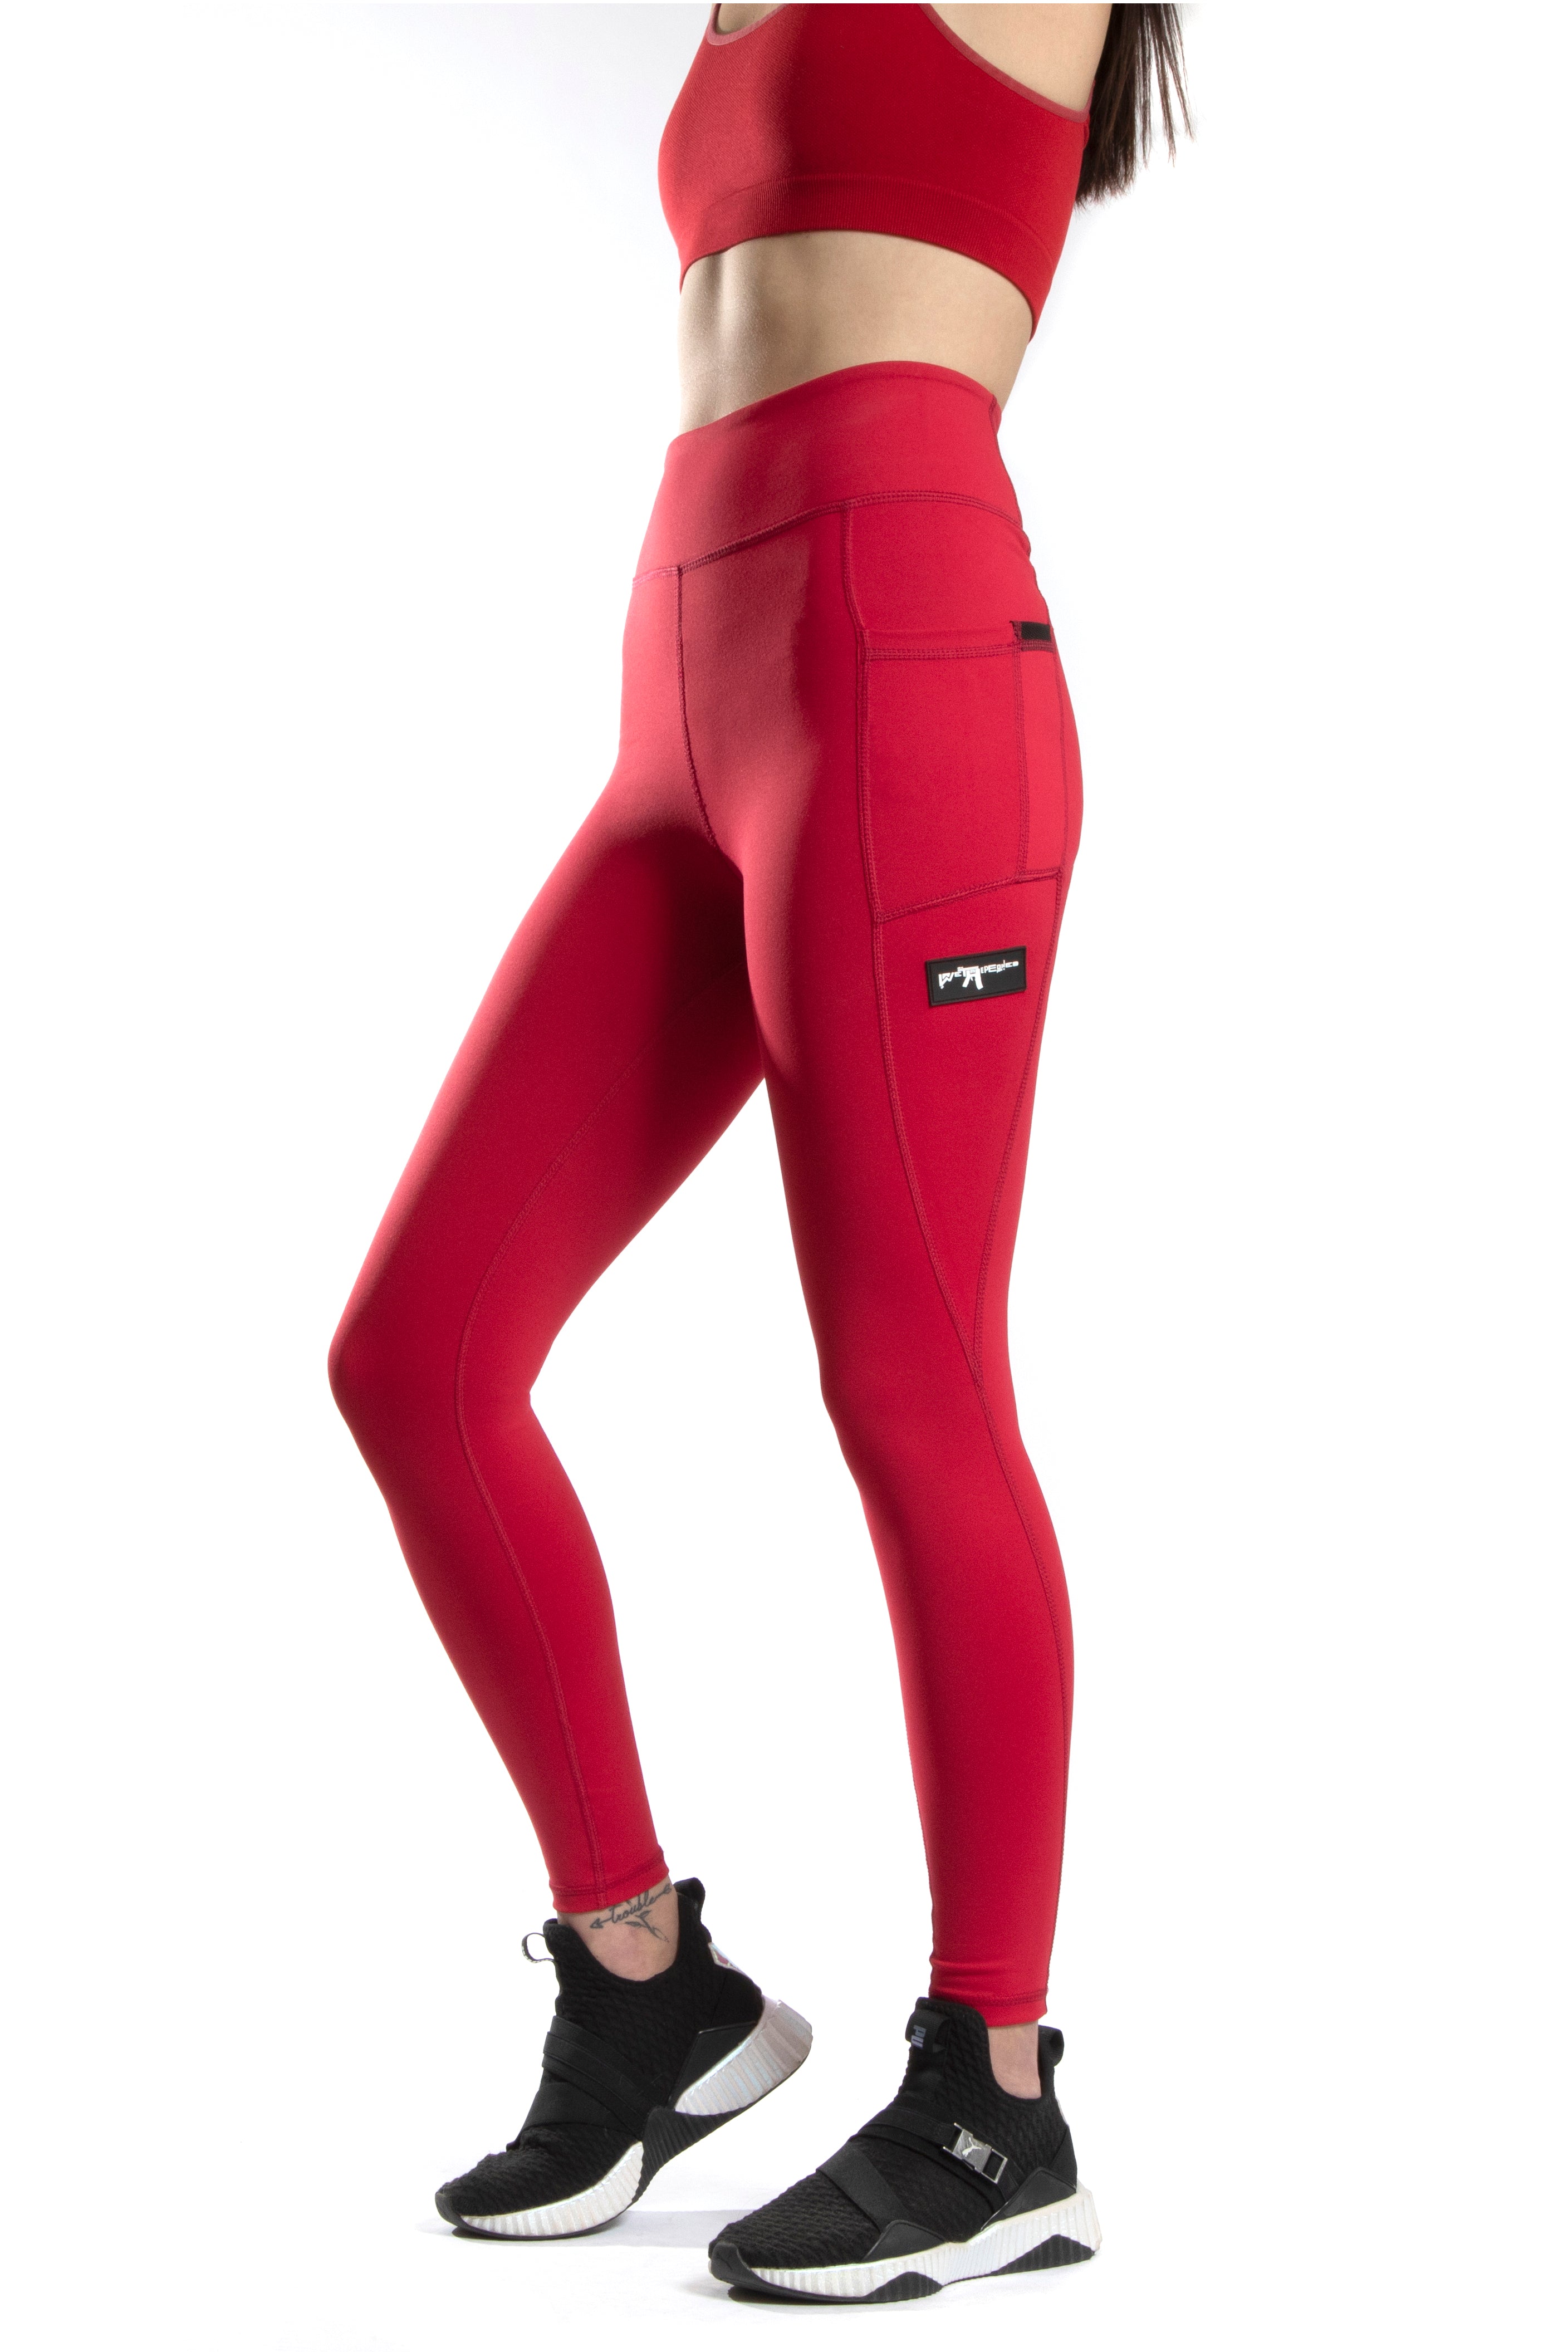 Life League Gear - Dive - Women's Leggings with Pockets (Red/Black  Accents)